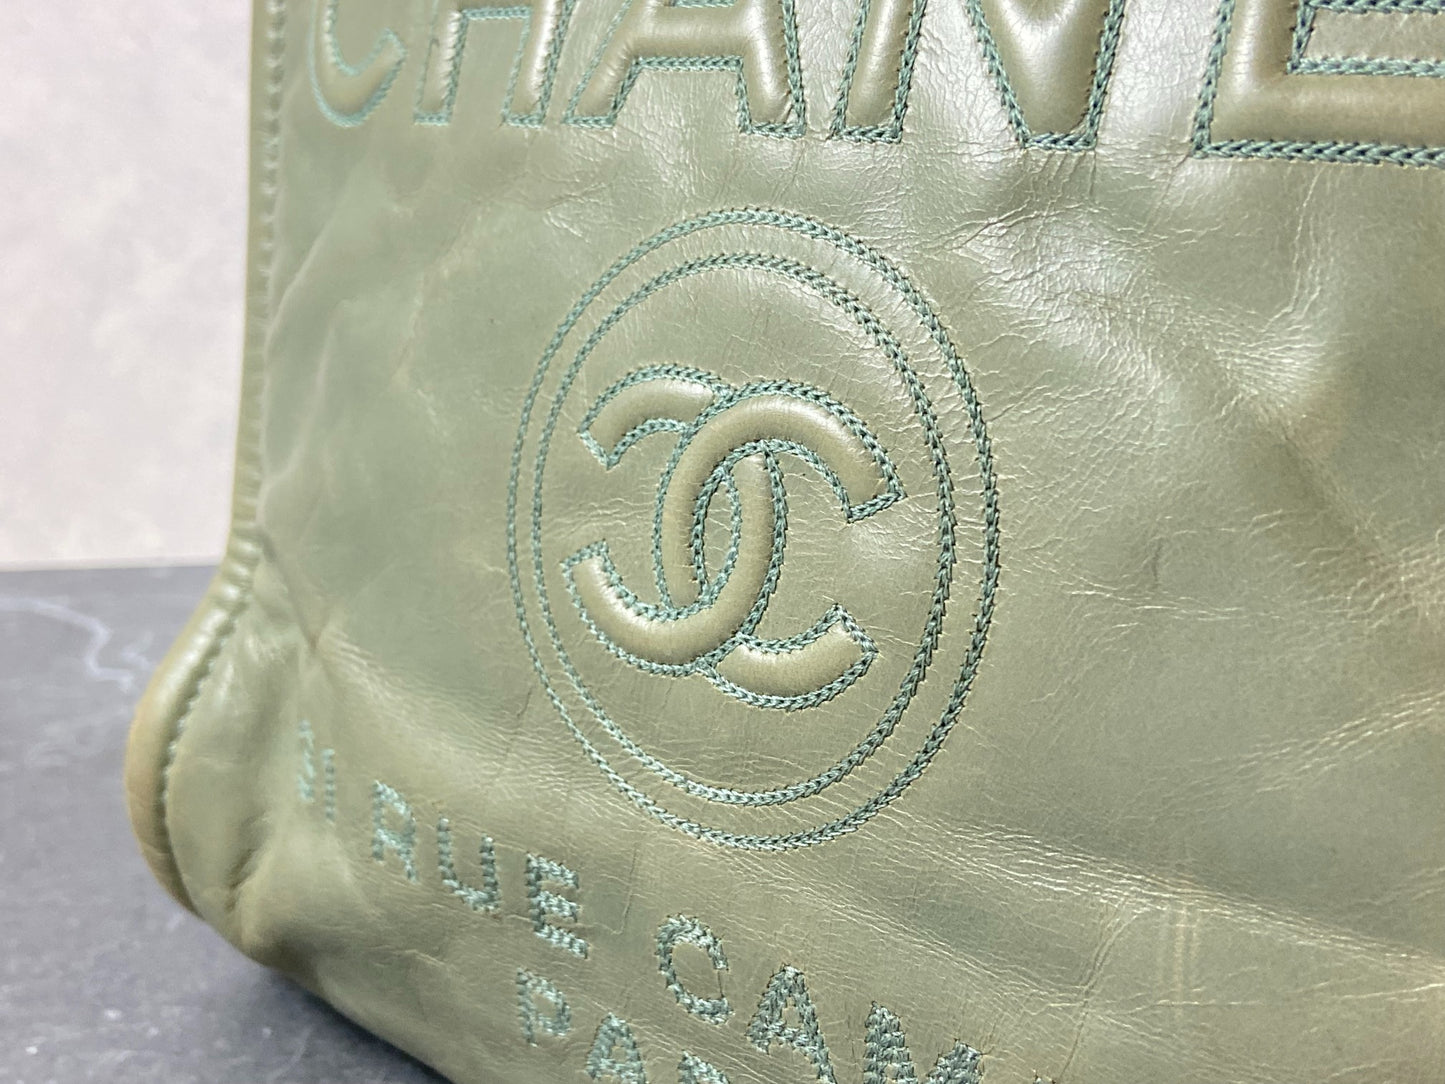 Chanel Deauville Hand / Tote Bag Mint Green Leather